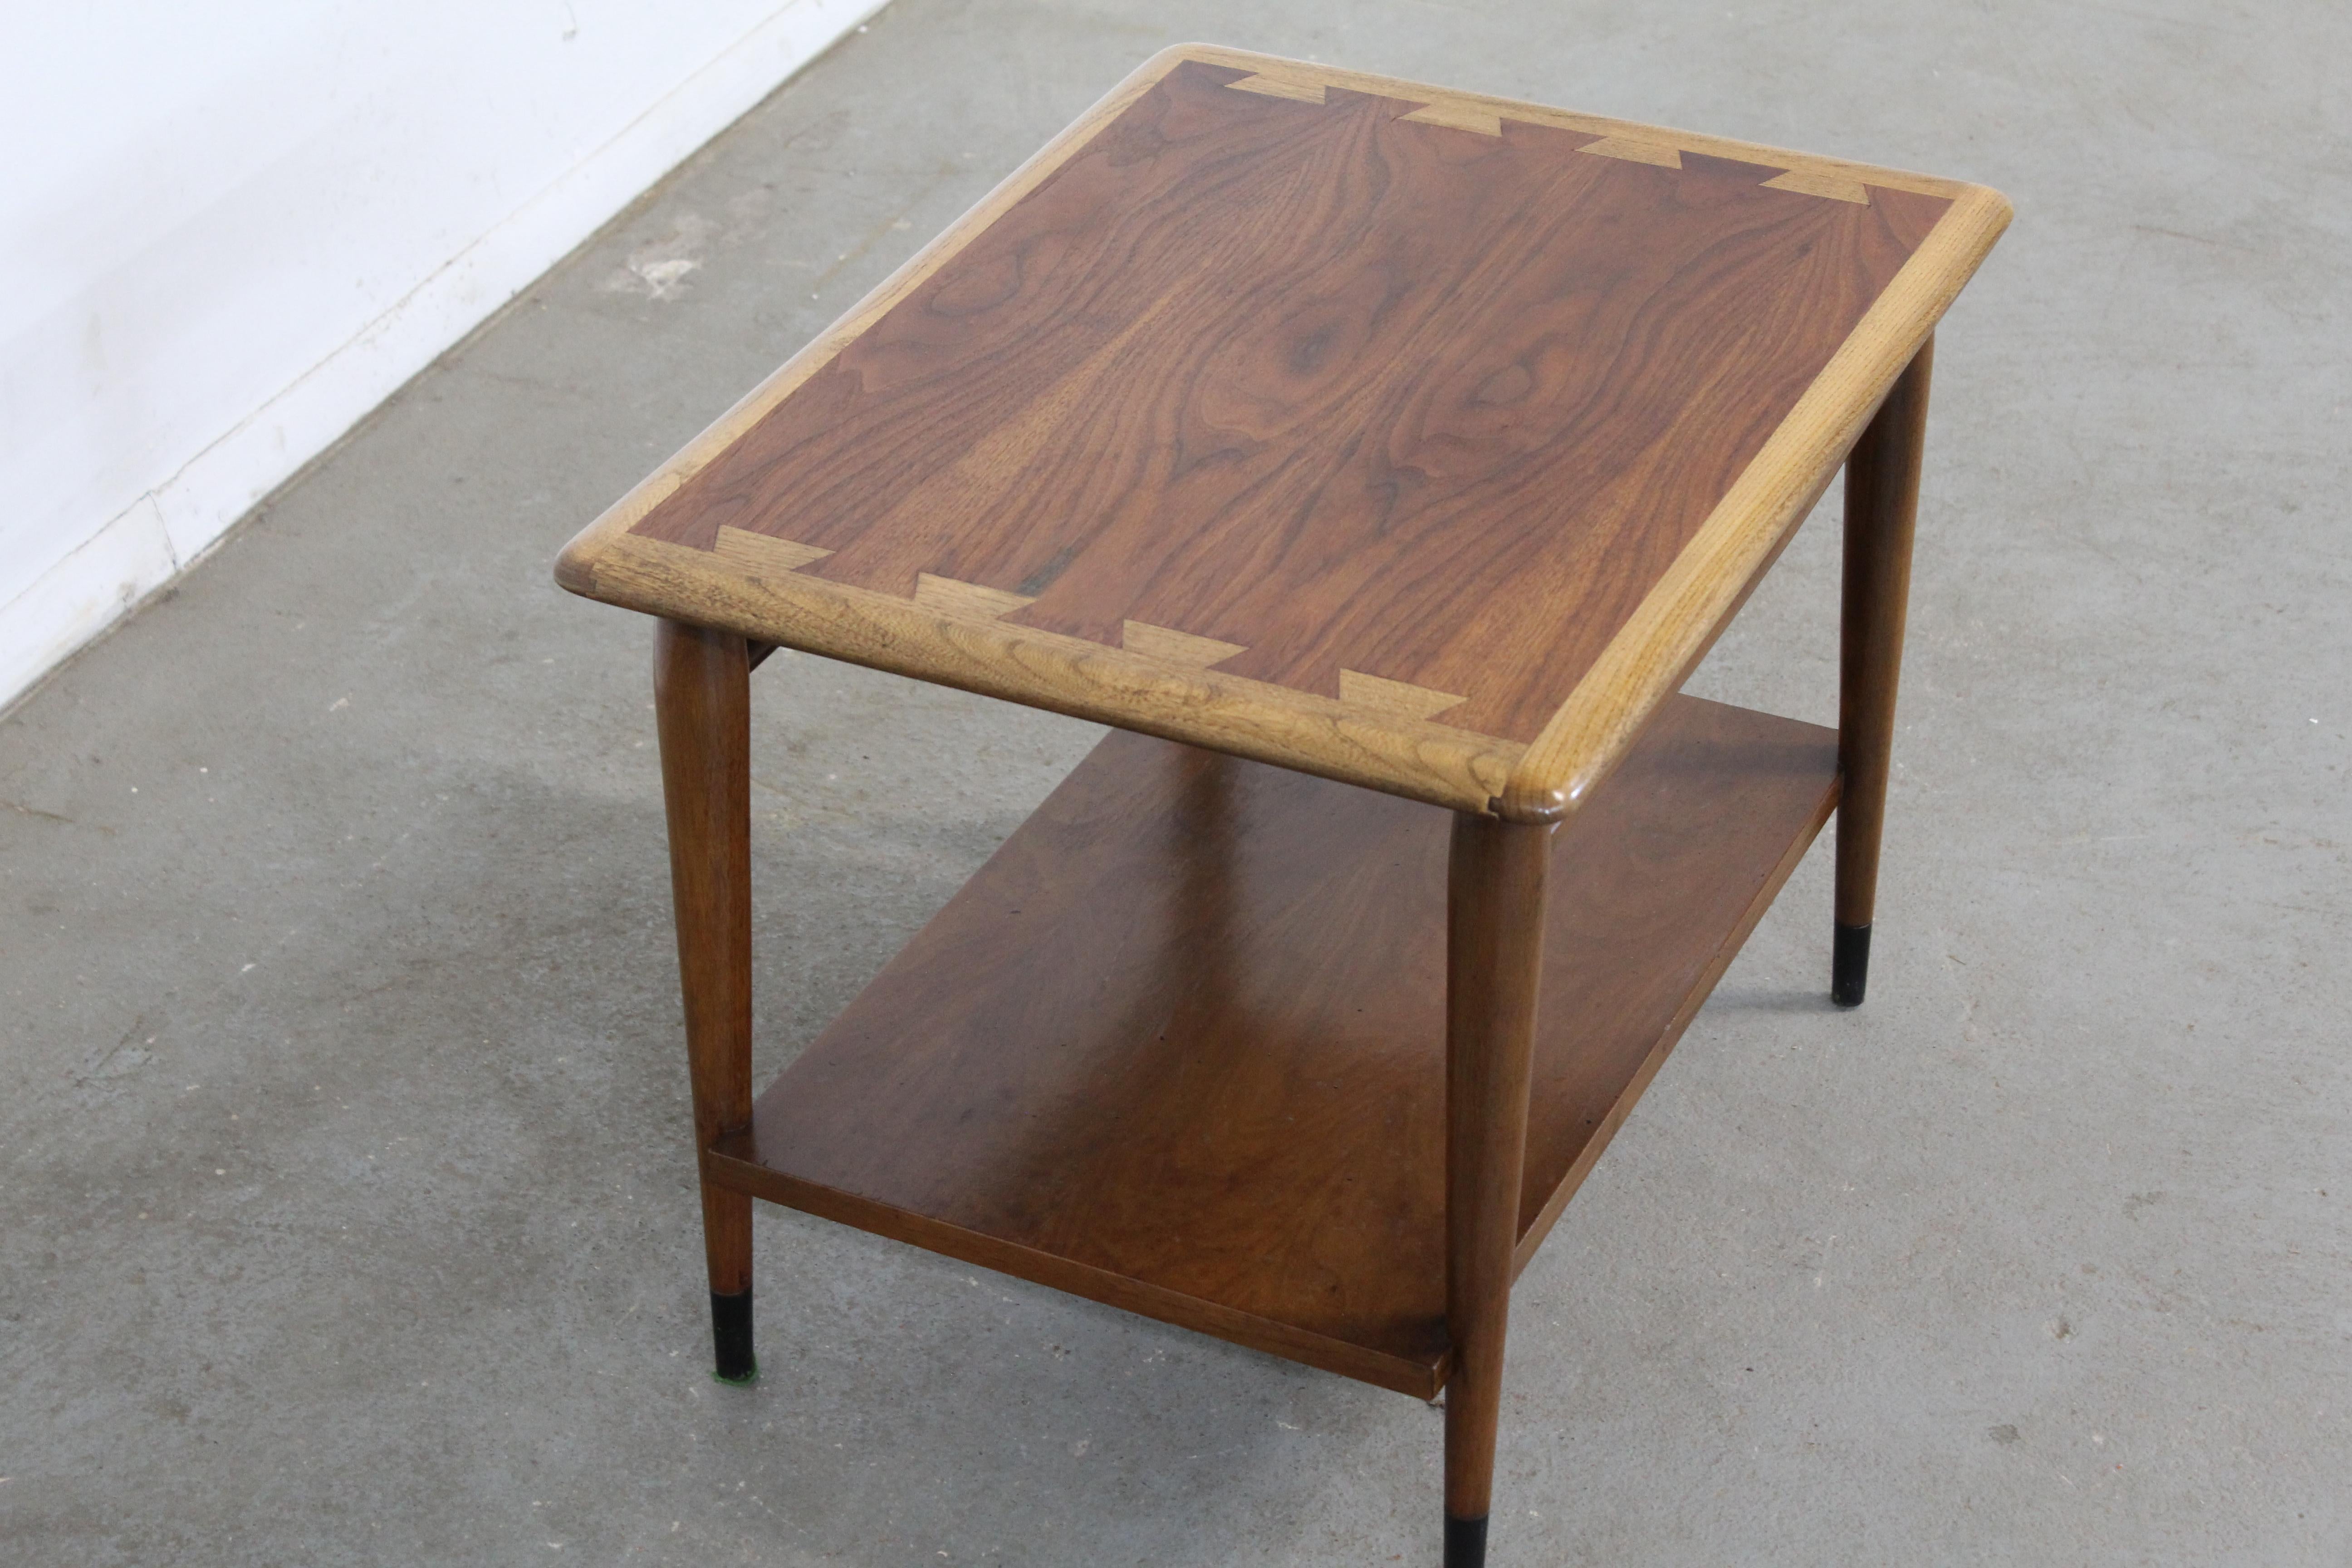 Mid century end table Danish modern by Andre Bus Lane Acclaim 900-05

Offered is a Mid-Century Modern end table from the Lane 'Acclaim' collection, designed by Andre Bus. They have the signature dovetailed design and tapered legs and bottom